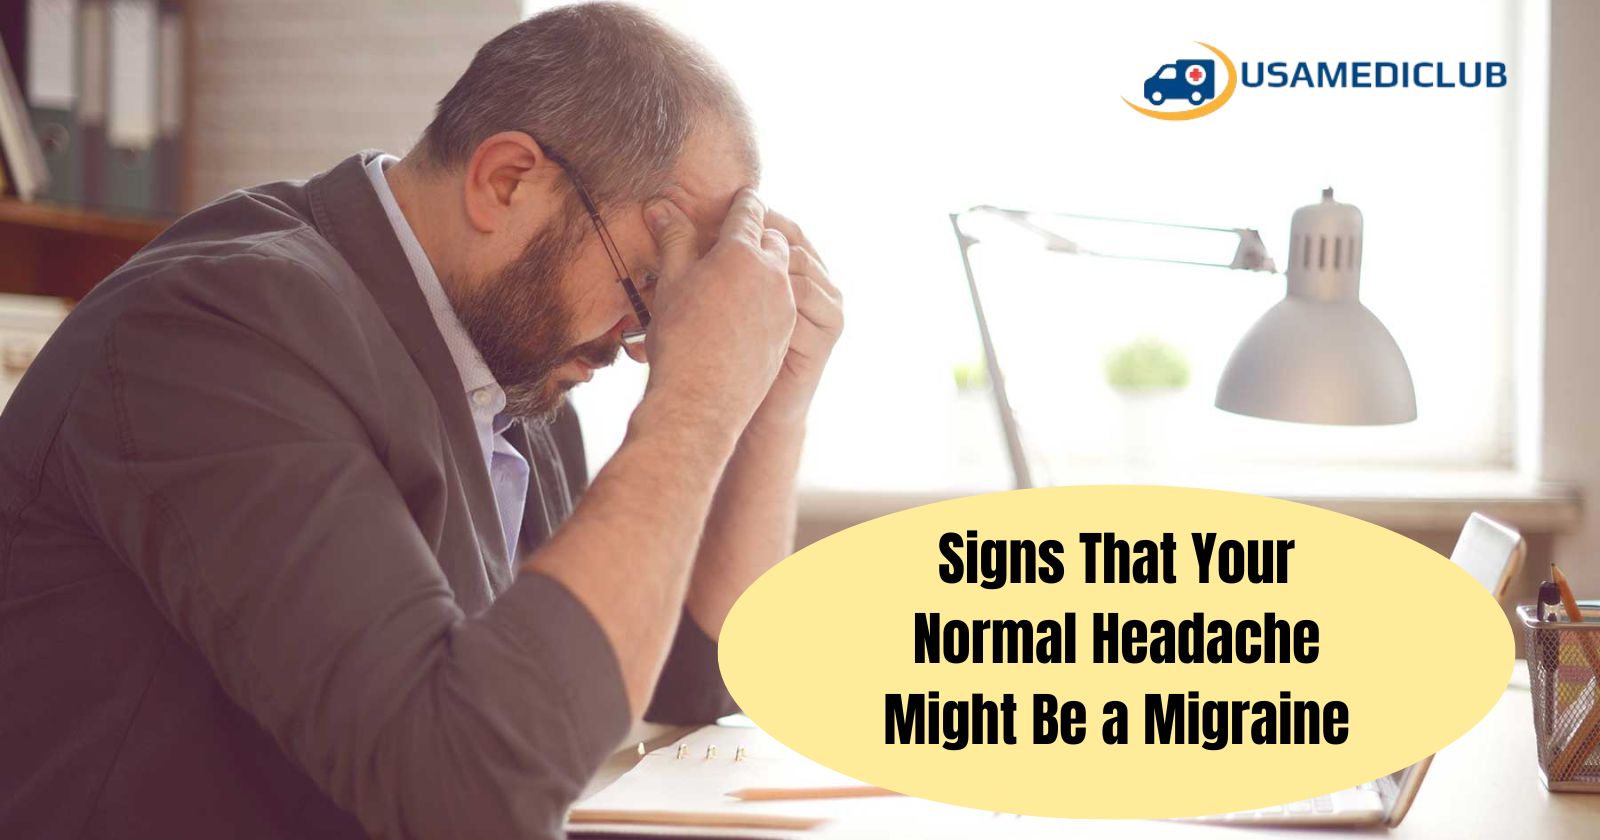 Signs That Your Normal Headache Might Be a Migraine